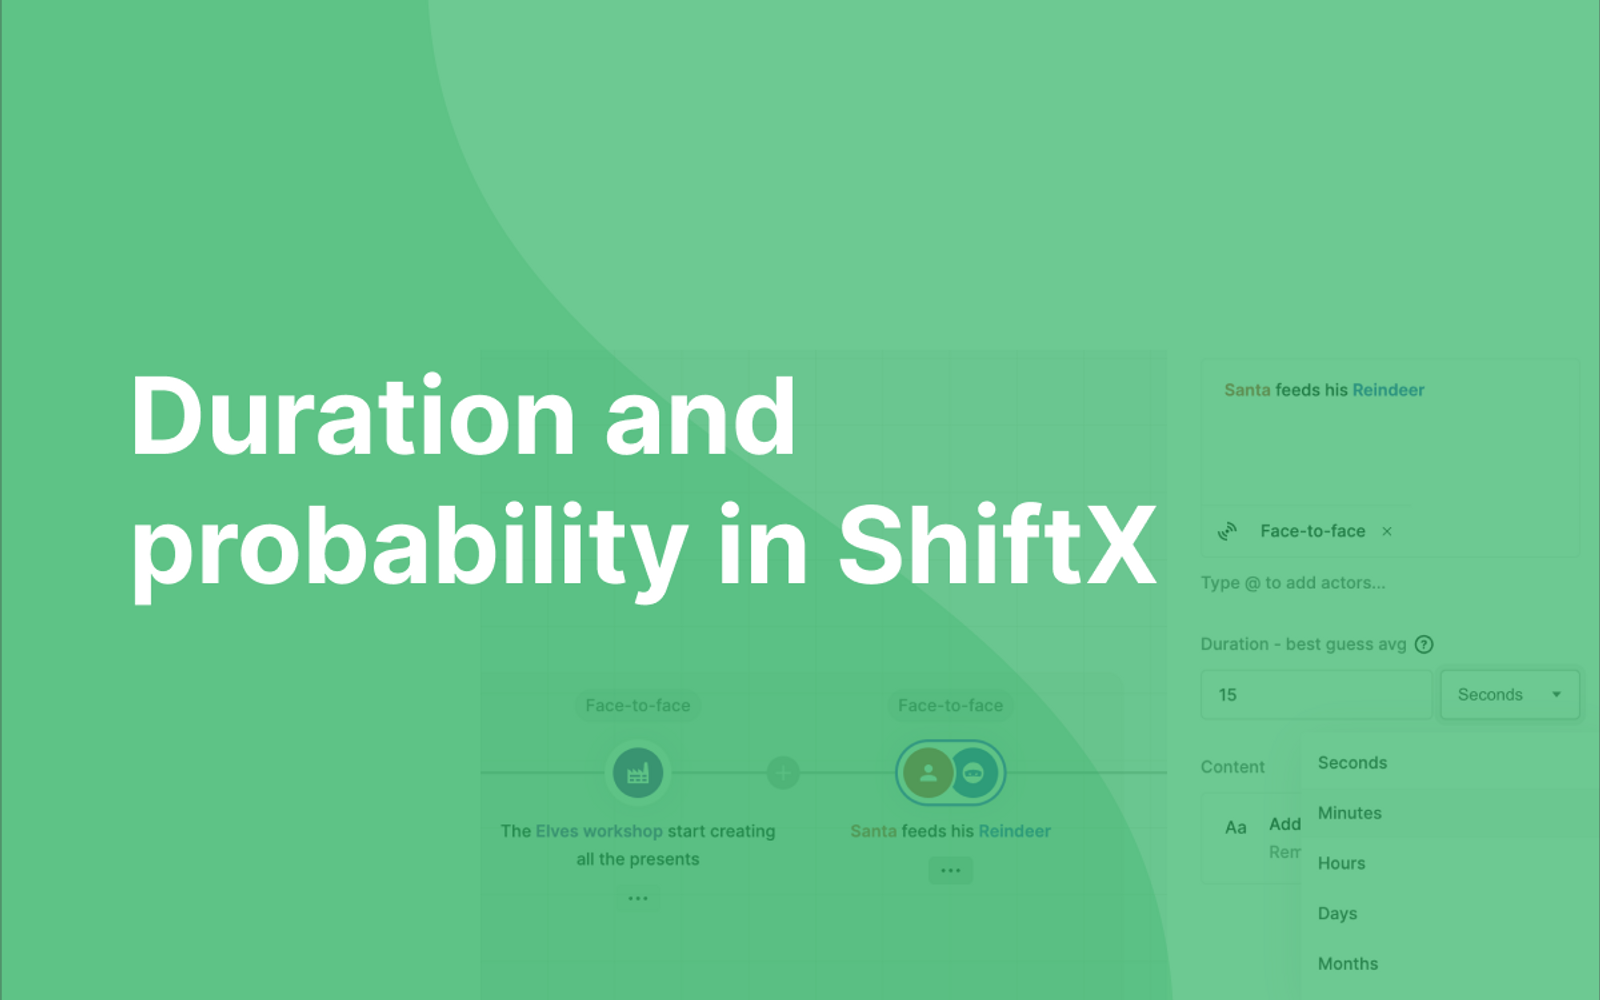 "Duration and probability in ShiftX" written over a green transparent background